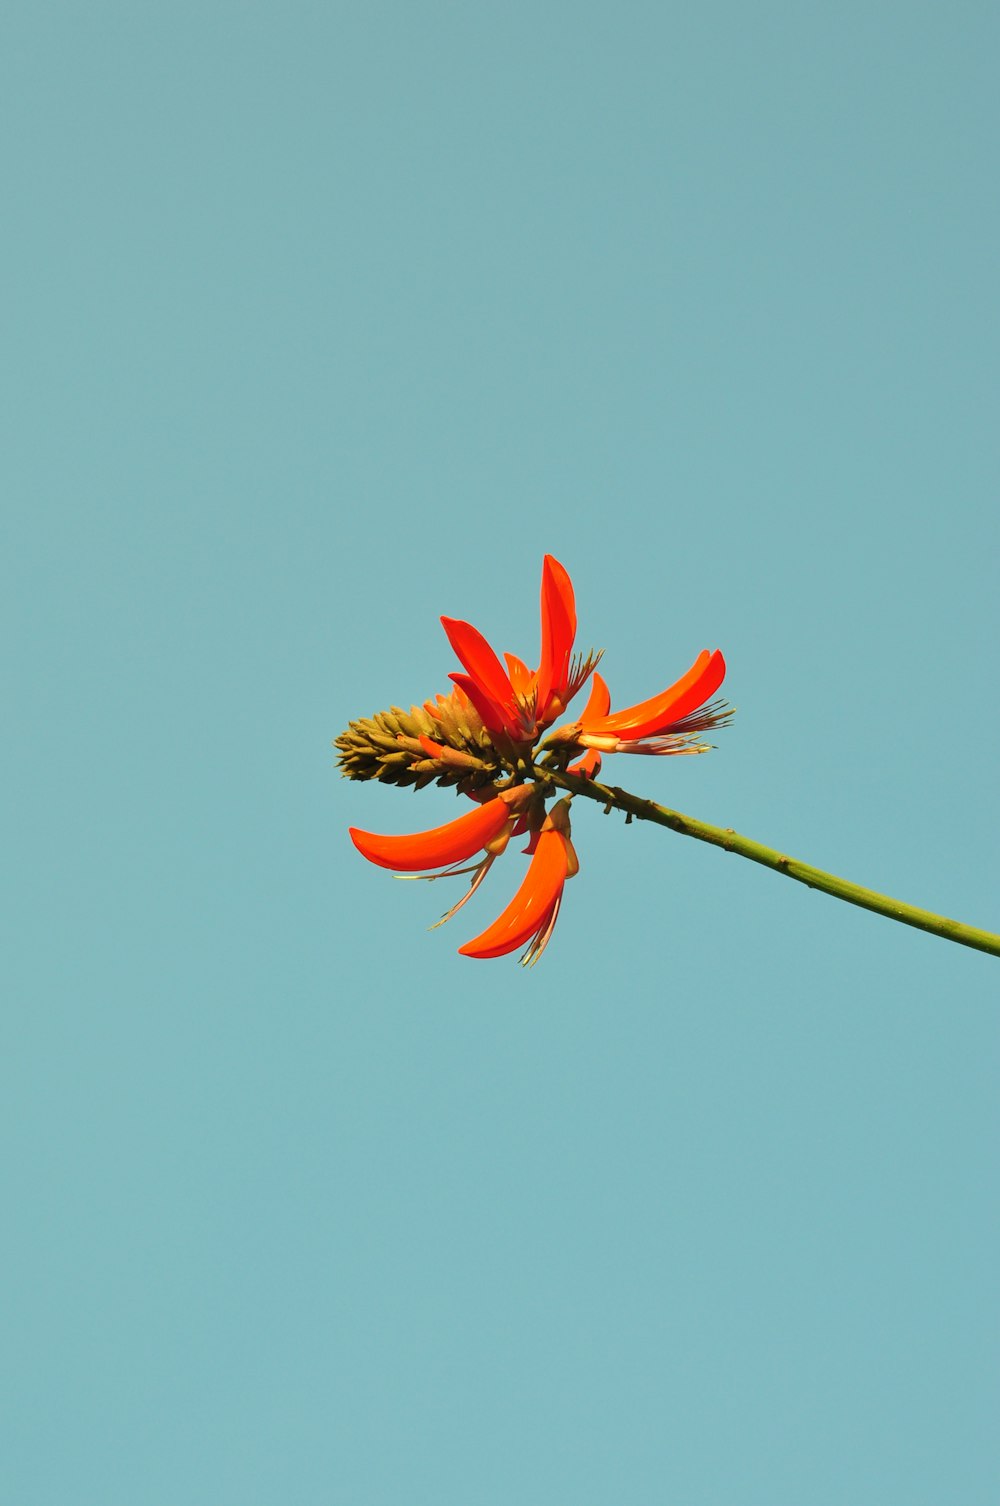 red and yellow flower under blue sky during daytime